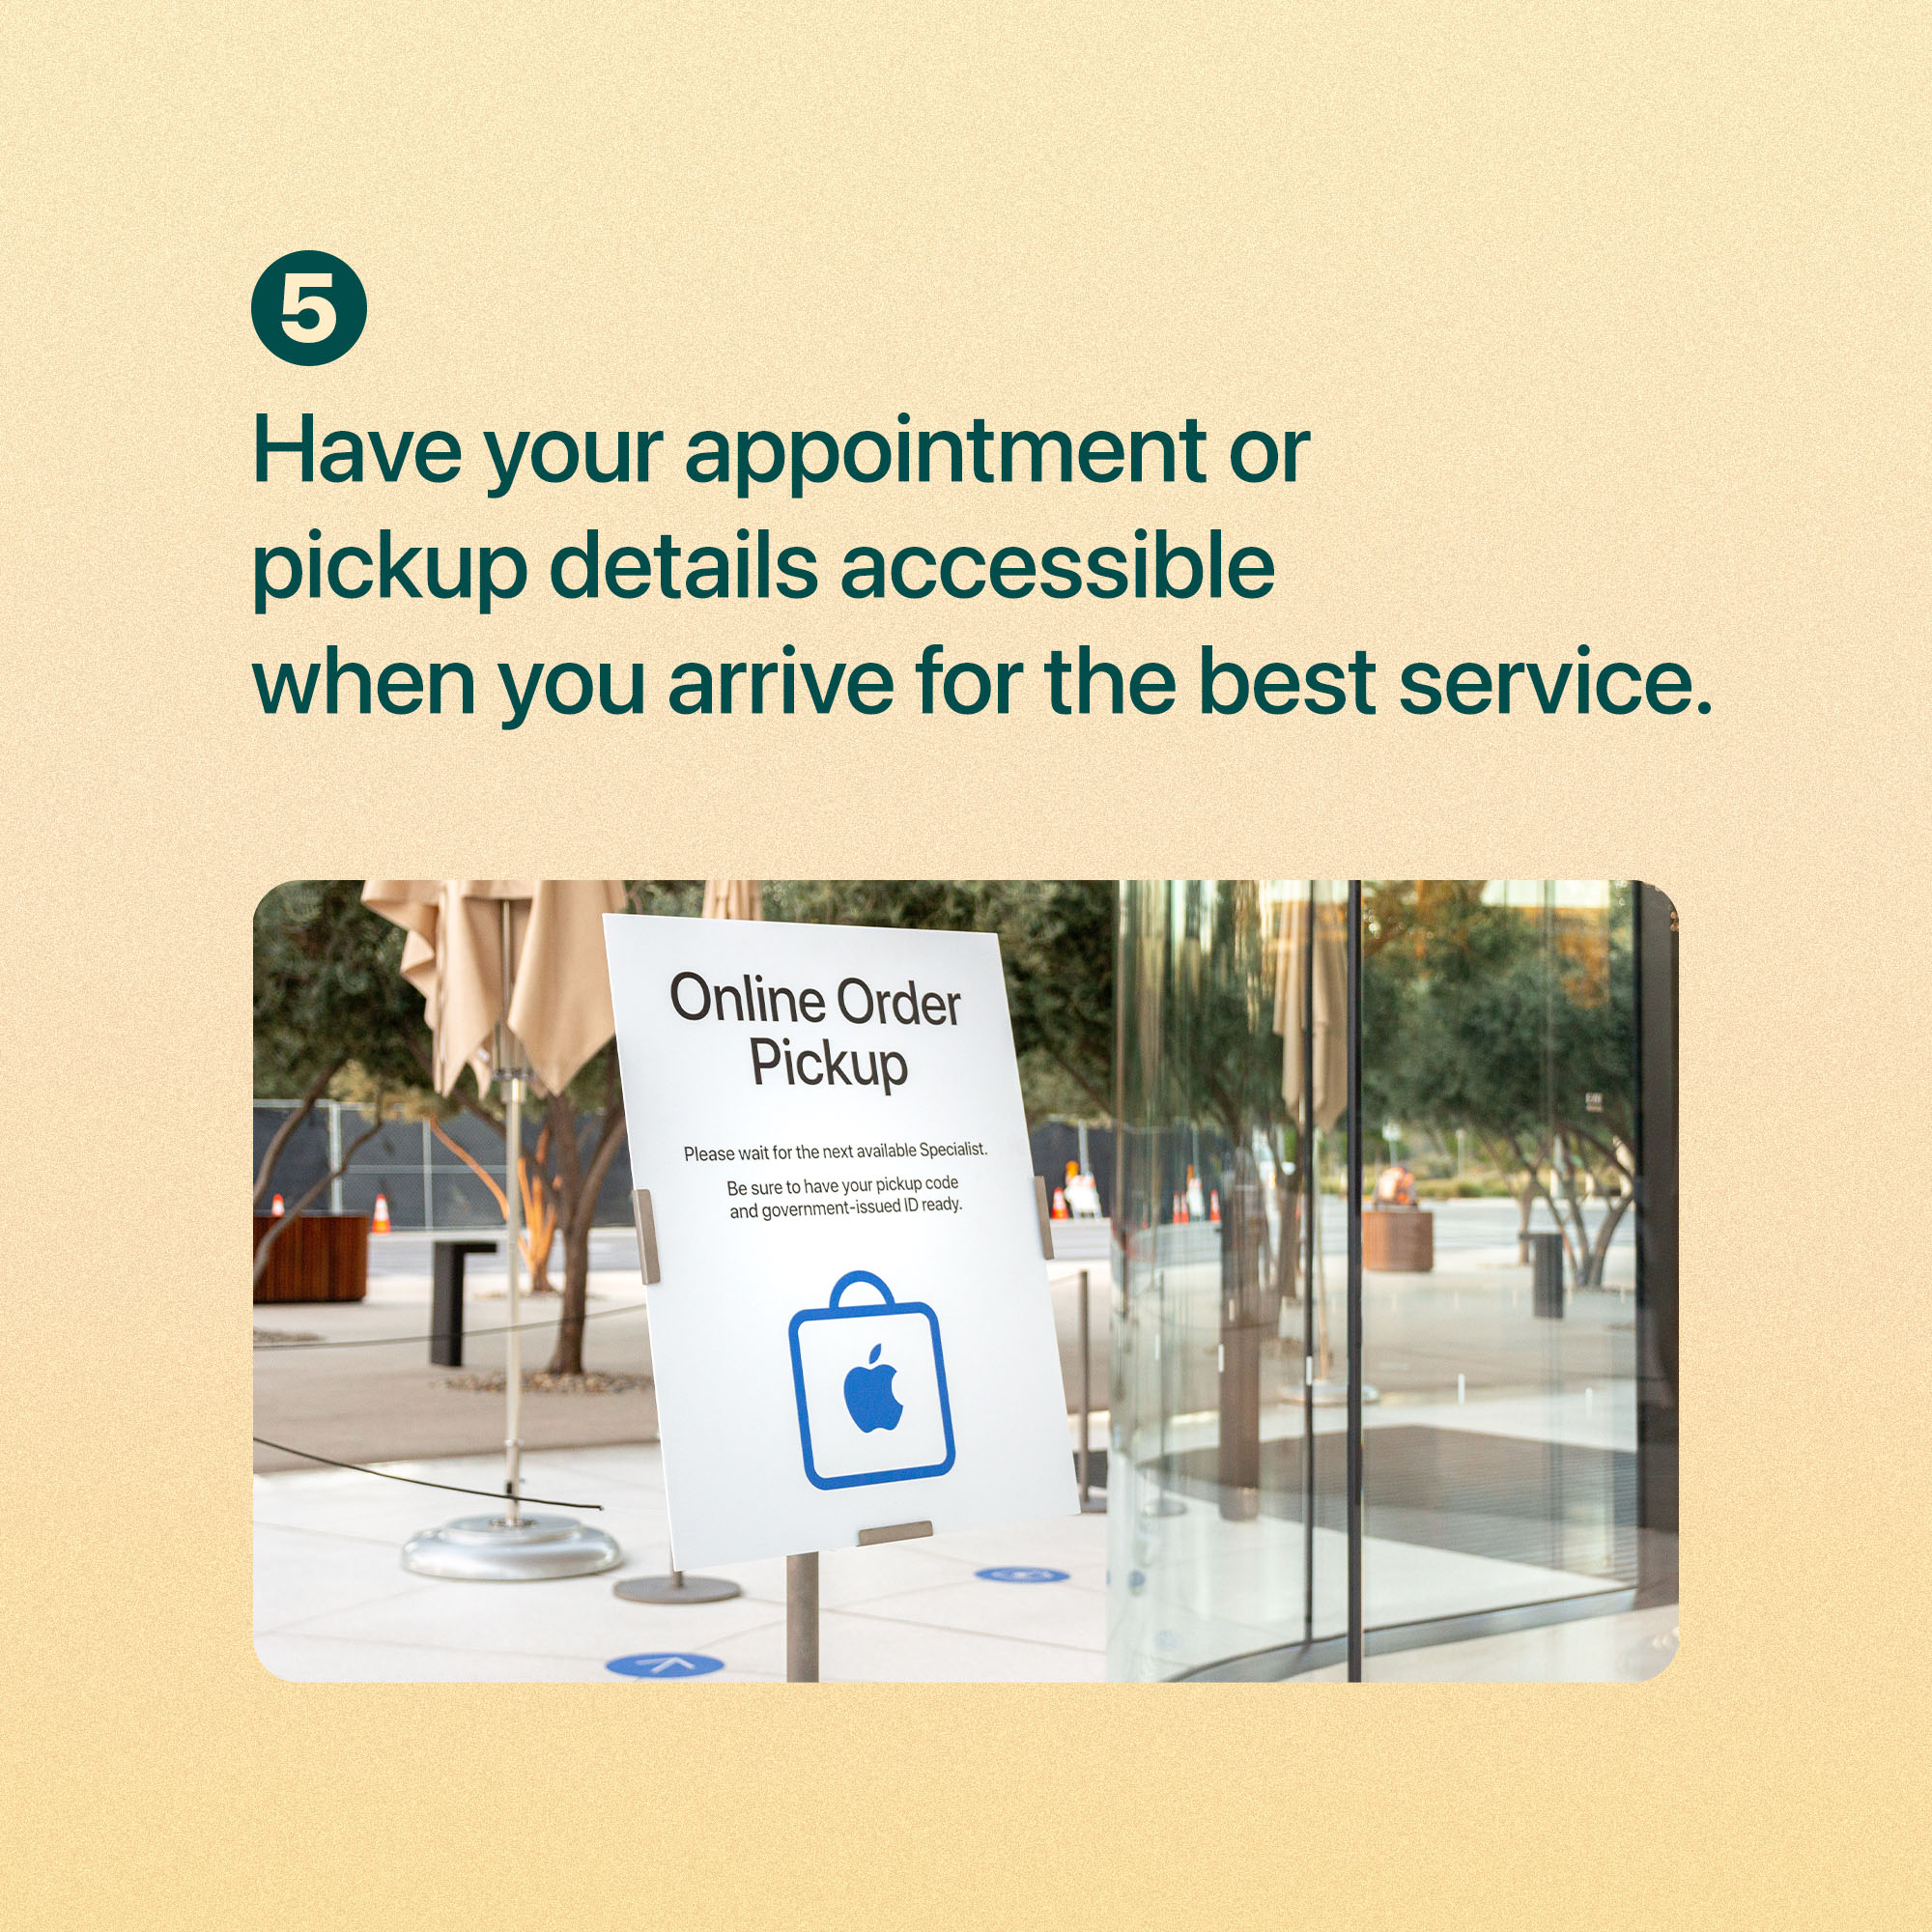 Have your appointment or pickup details accessible when you arrive for the best service.